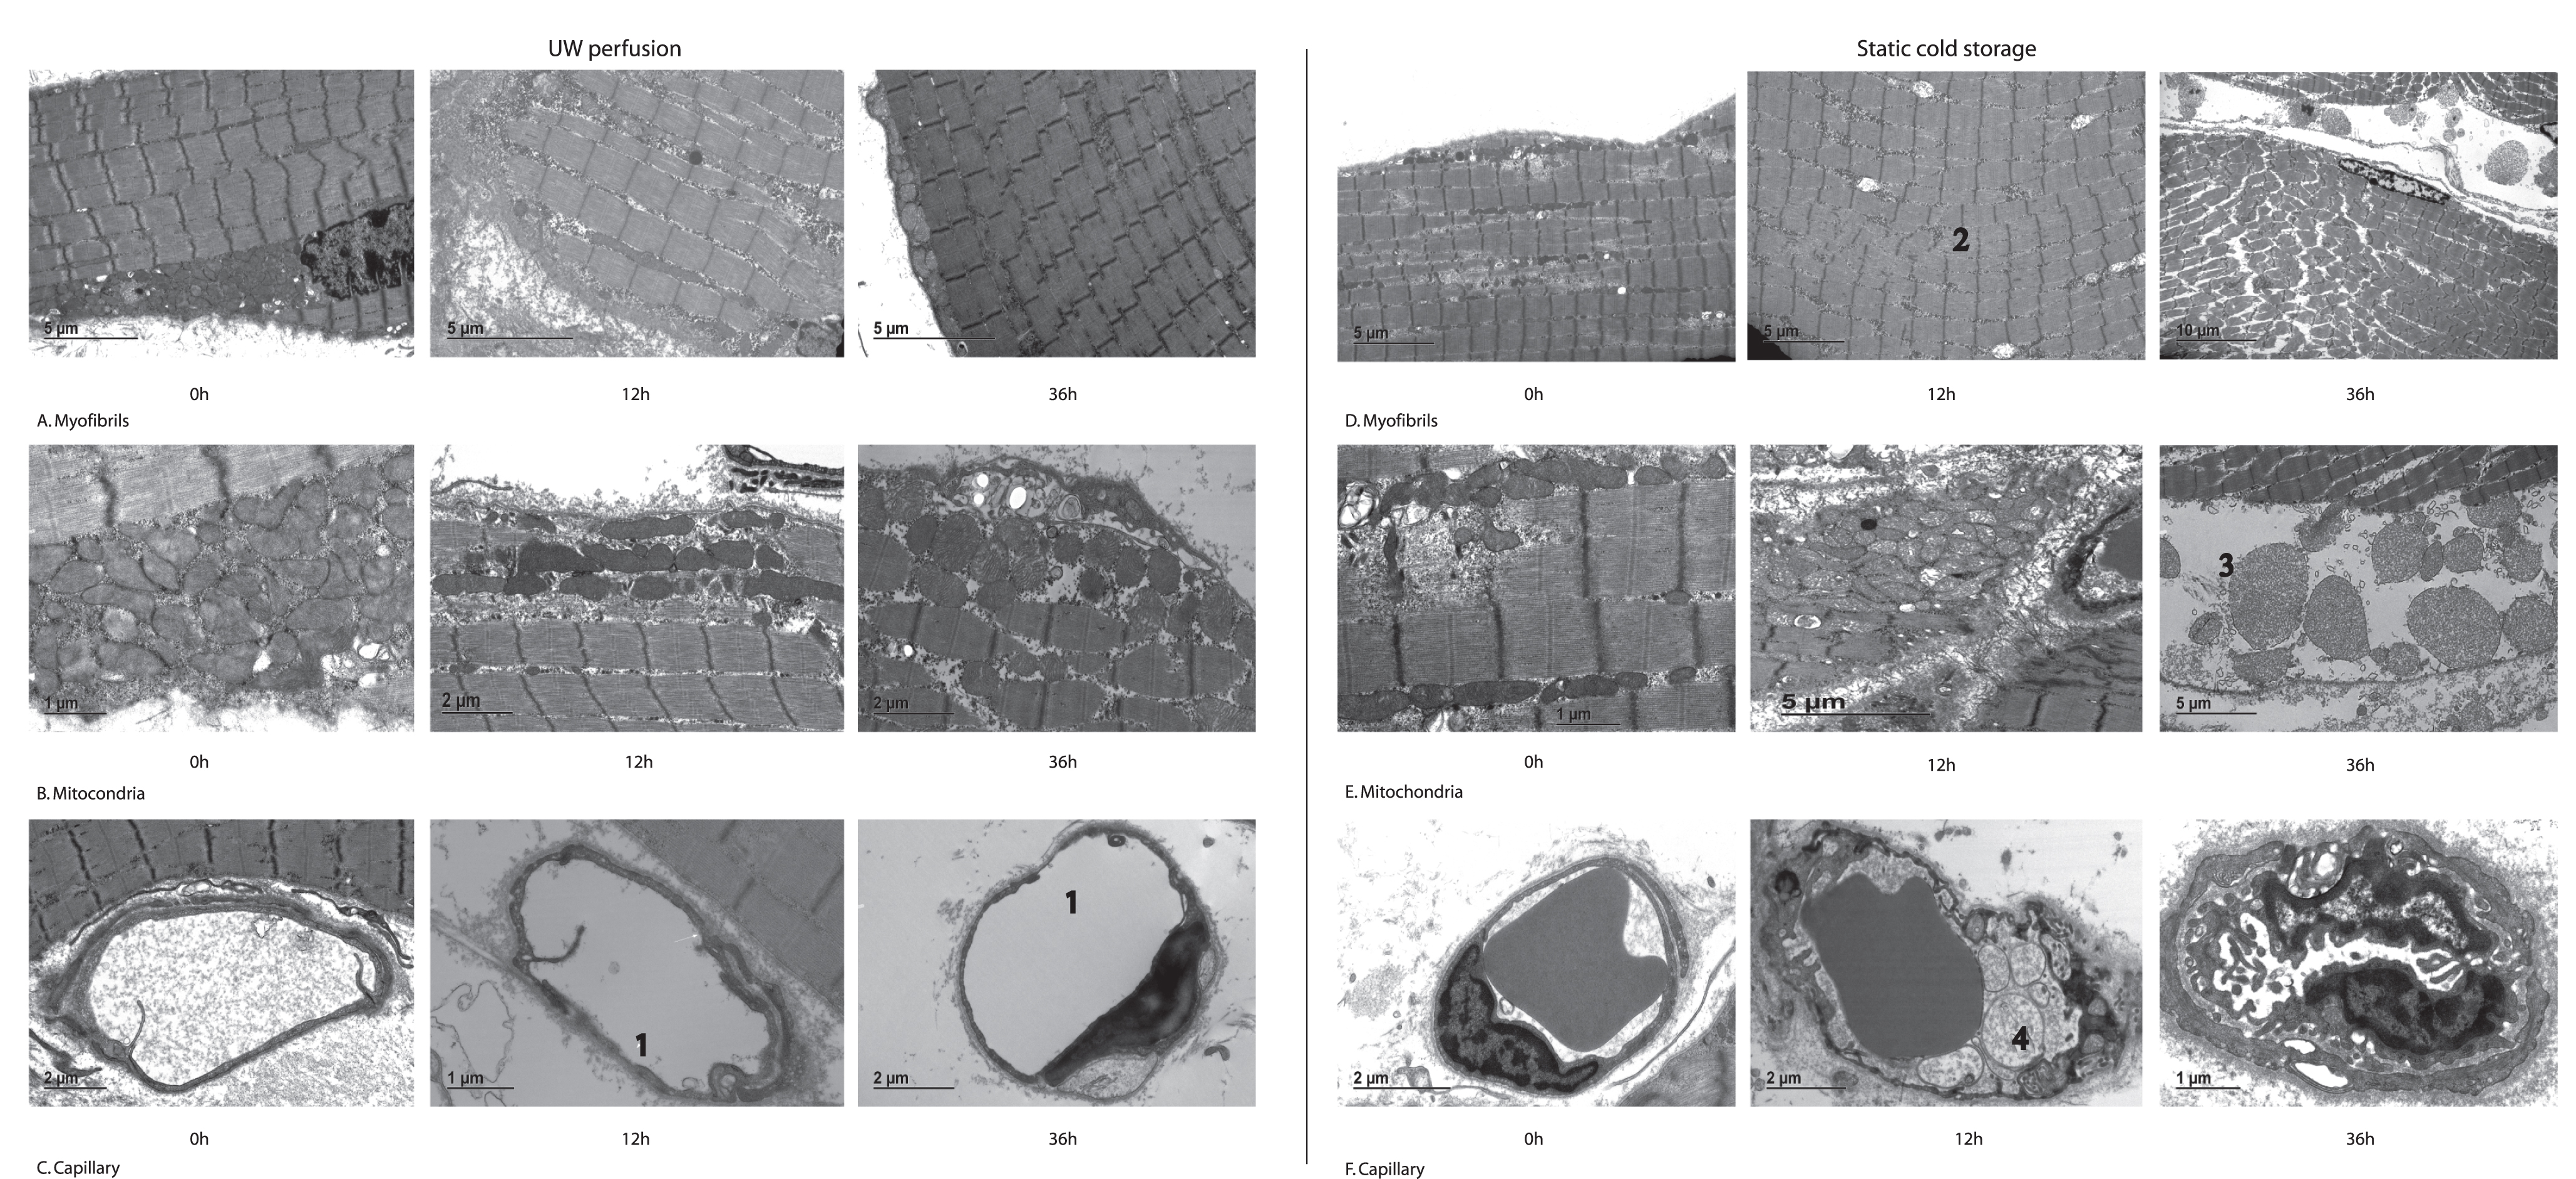 Representative electron microscopy images of muscle biopsies taken during extracorporeal perfusion and static cold storage throughout the preservation period. Left top row: myofibrillar arrangement during ECP showing preserved architecture with only minor Z-band changes. Left middle row: mitochondria during ECP showing mild swelling over time, but no degeneration. Left bottom row: capillaries during ECP with focal thinning at 12 h and 36 h of preservation (1). Right top row: myofibrillar arrangement during SCS showing Z-band changes at 12 h (2) and severe distortion of arrangement at 36 h of preservation. Right middle row: mitochondria during SCS showing swelling at 12 h and destruction at 36 h with rupture of membrane and leaking of contents (3). Right bottom row: capillaries during SCS with vacuoles and debris extending into the lumen (4) at 12 h, evolving into luminal obstruction at 36 h of preservation.